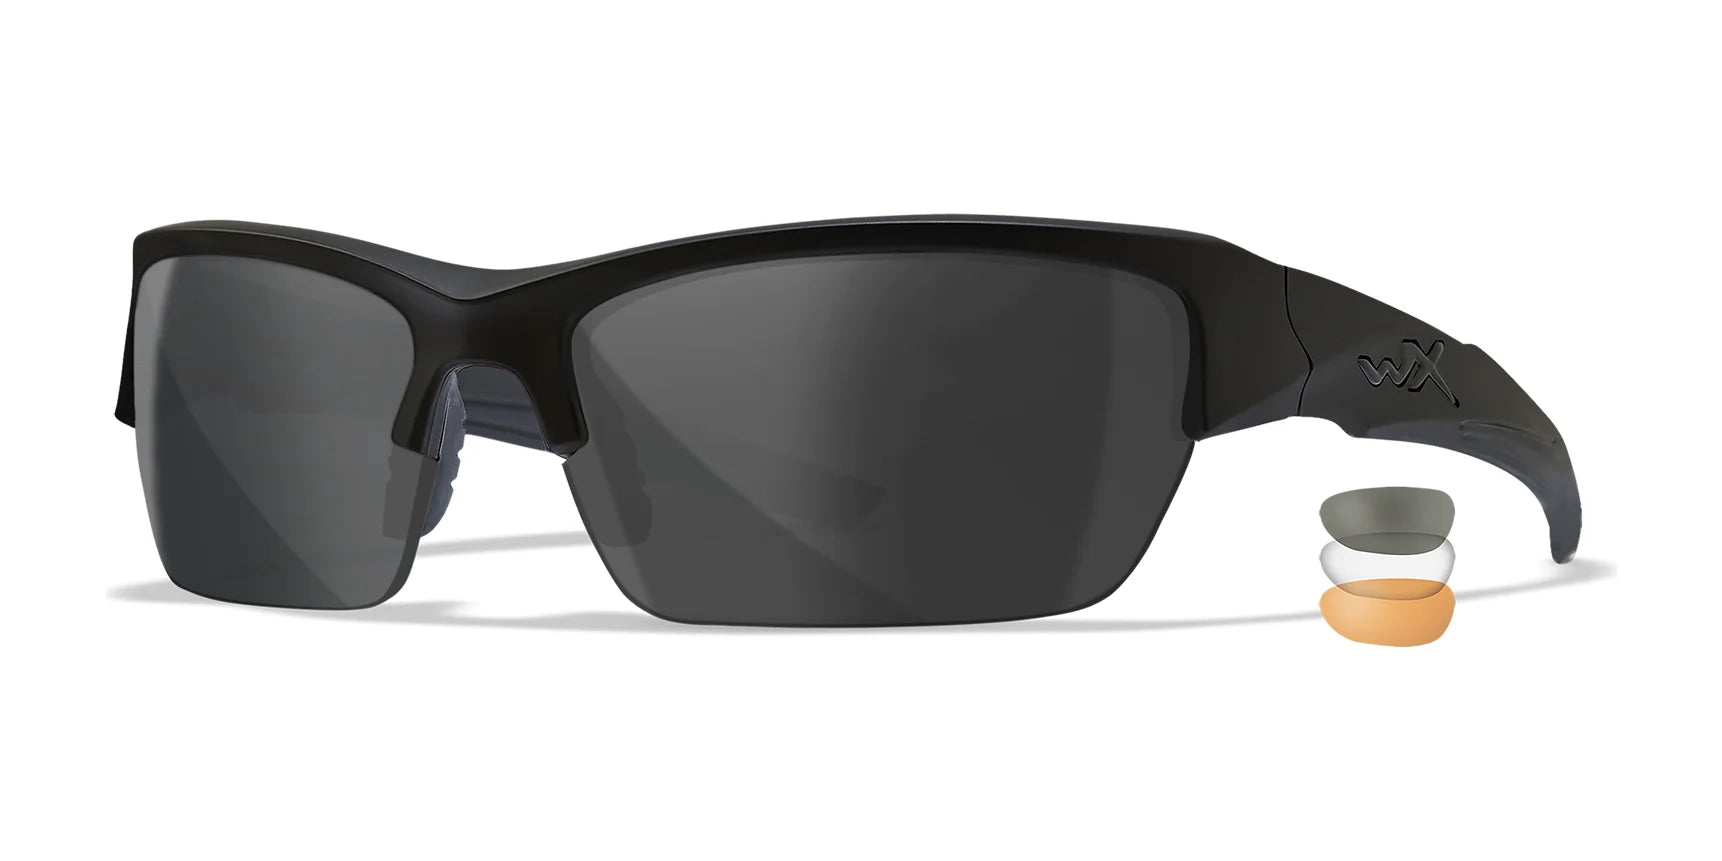 Wiley X VALOR Safety Glasses Matte Black / Clear, Smoke Grey, Light Rust